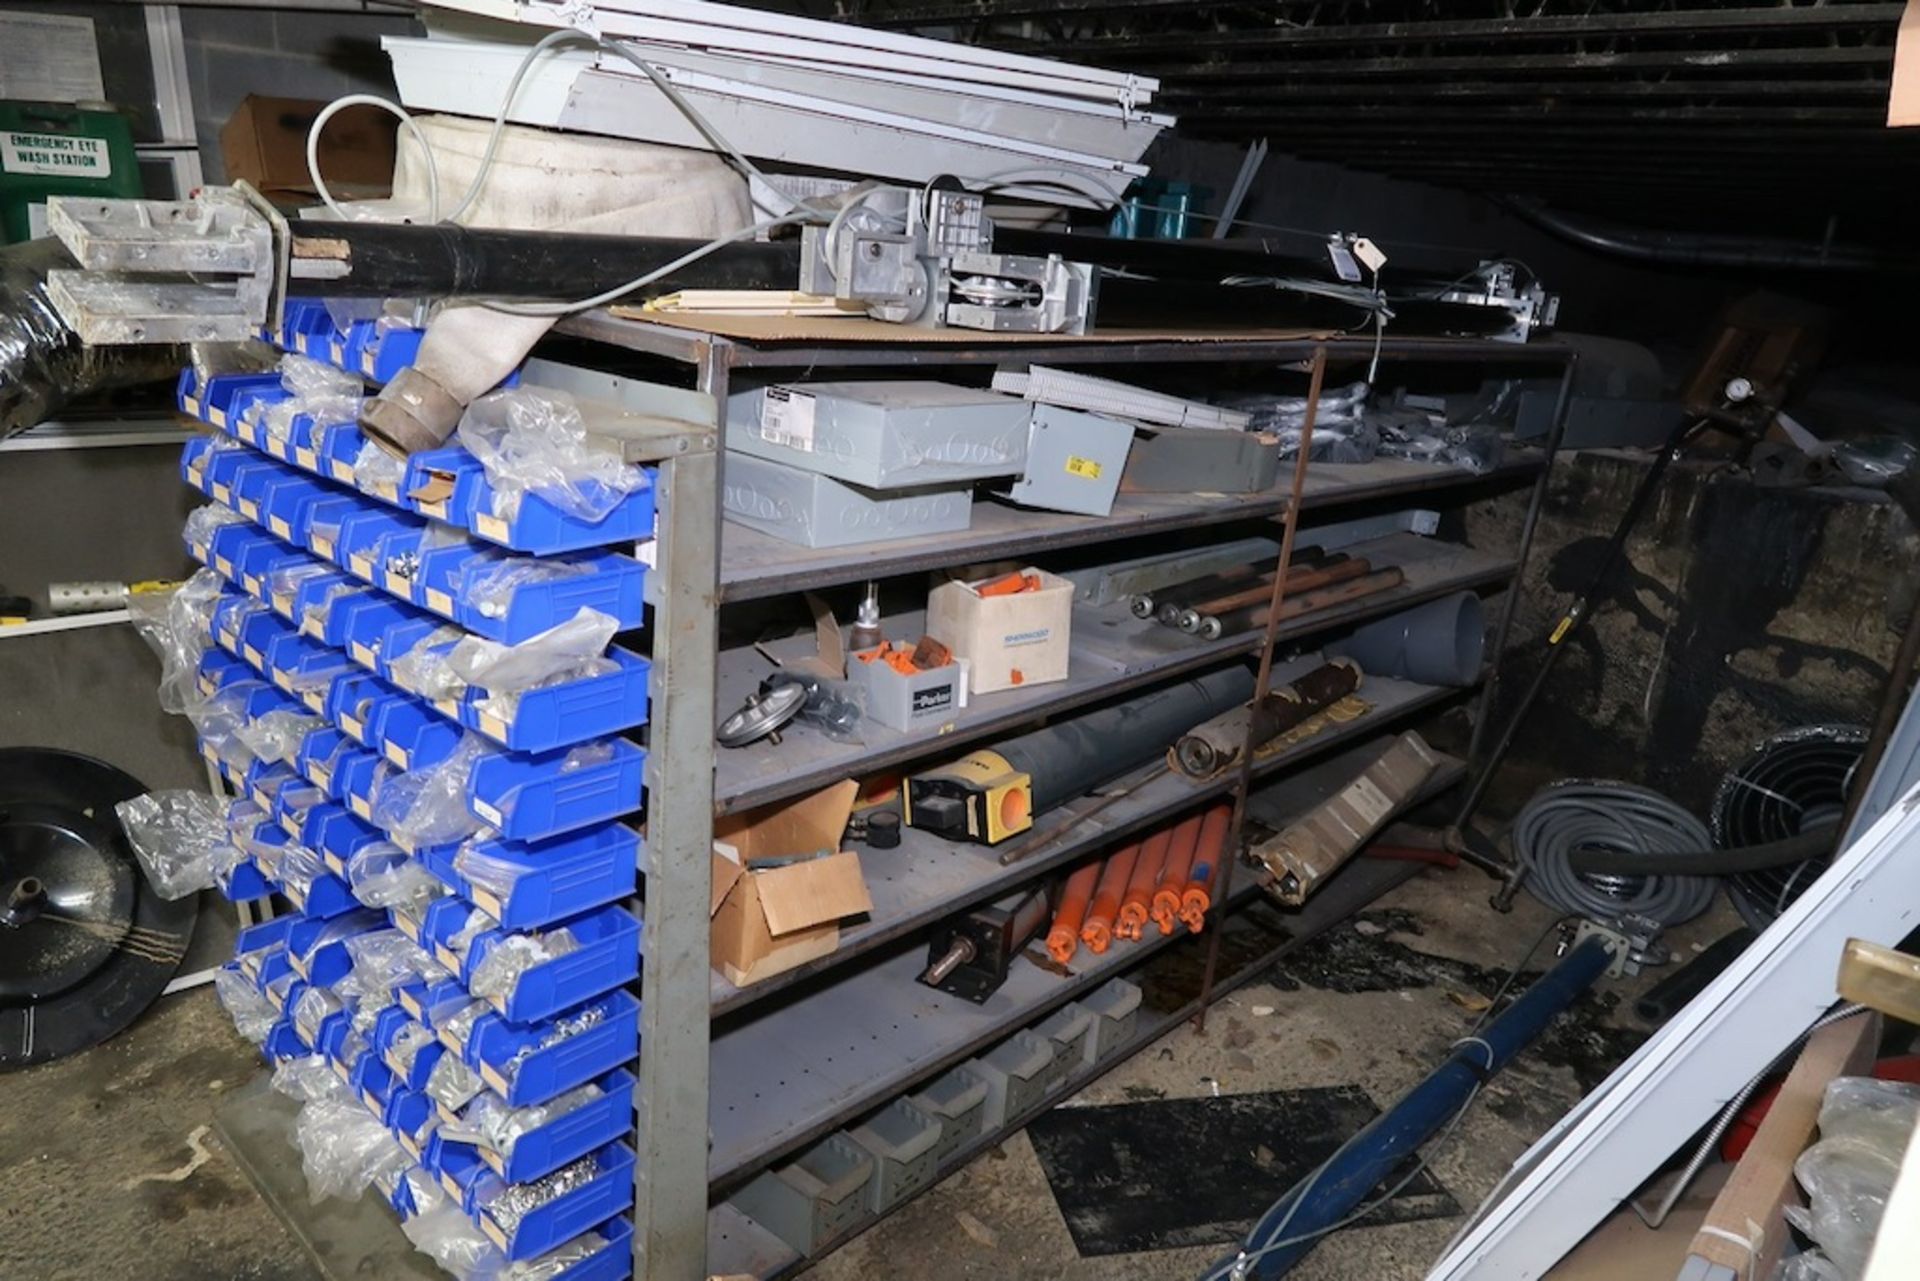 Remaining Contents of Under-Ramp Storage Room, Including Conveyor Parts and Rollers, Etc. - Image 20 of 21